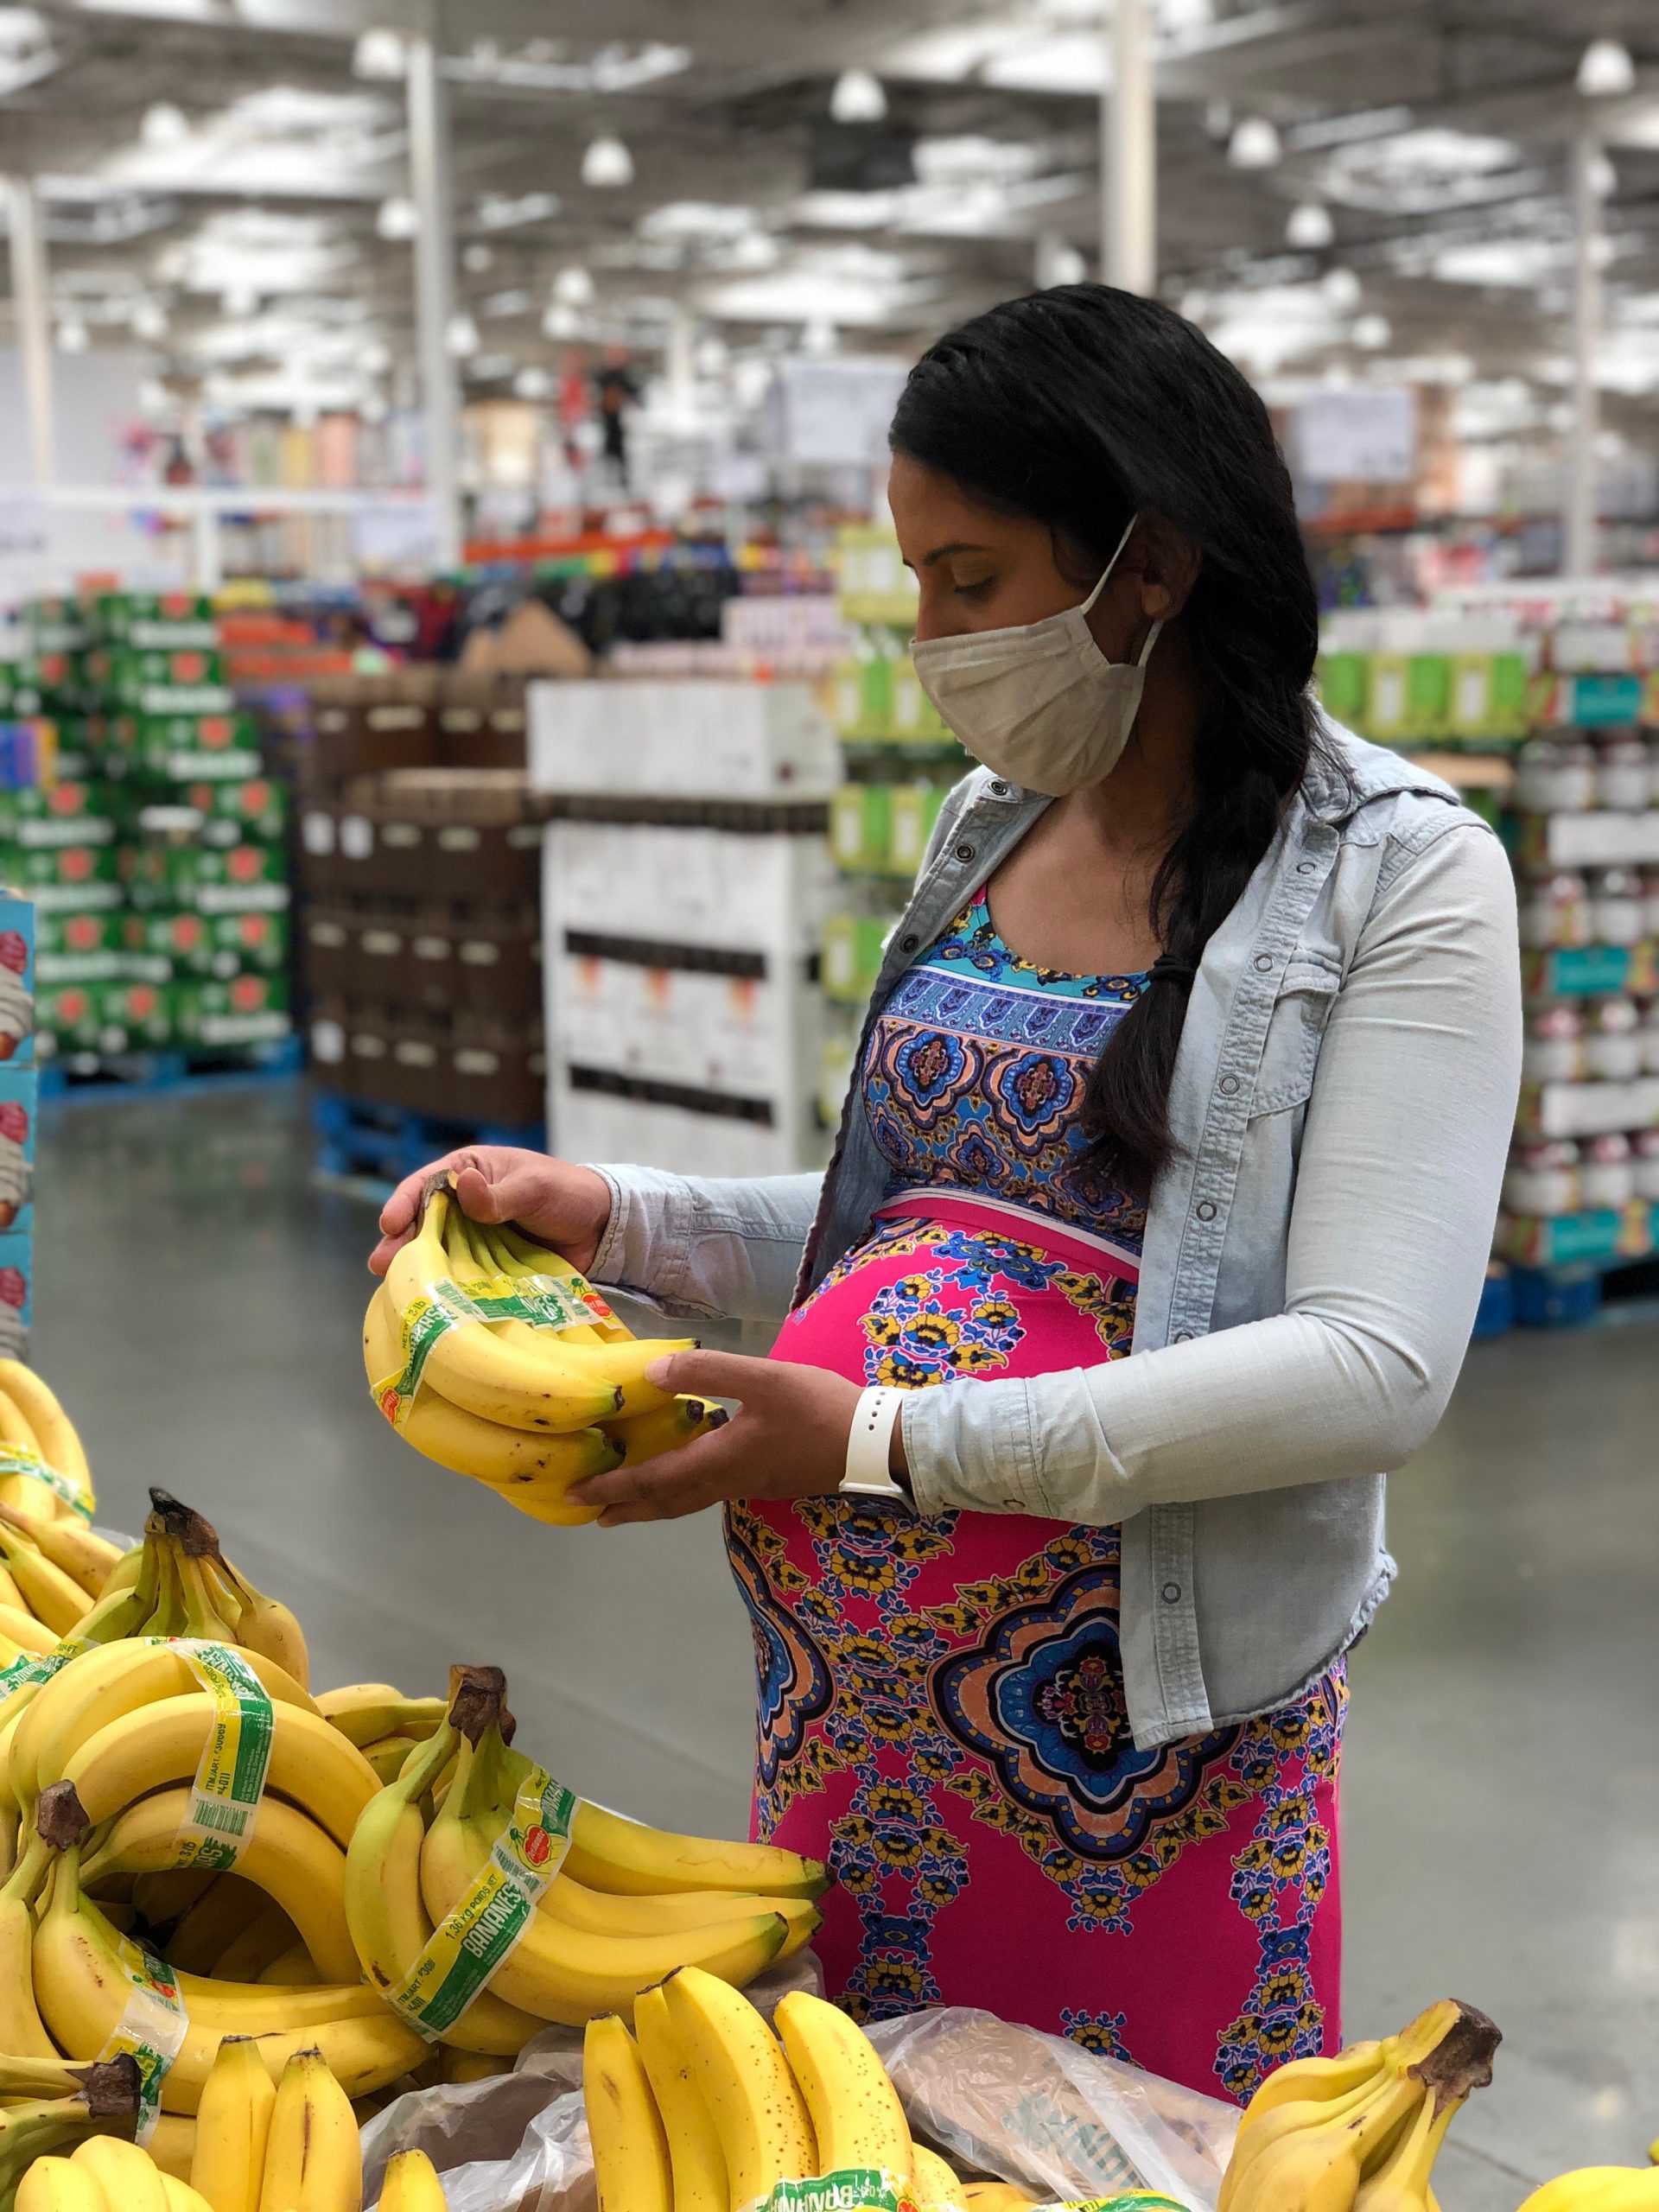 Pregnant woman in grocery store